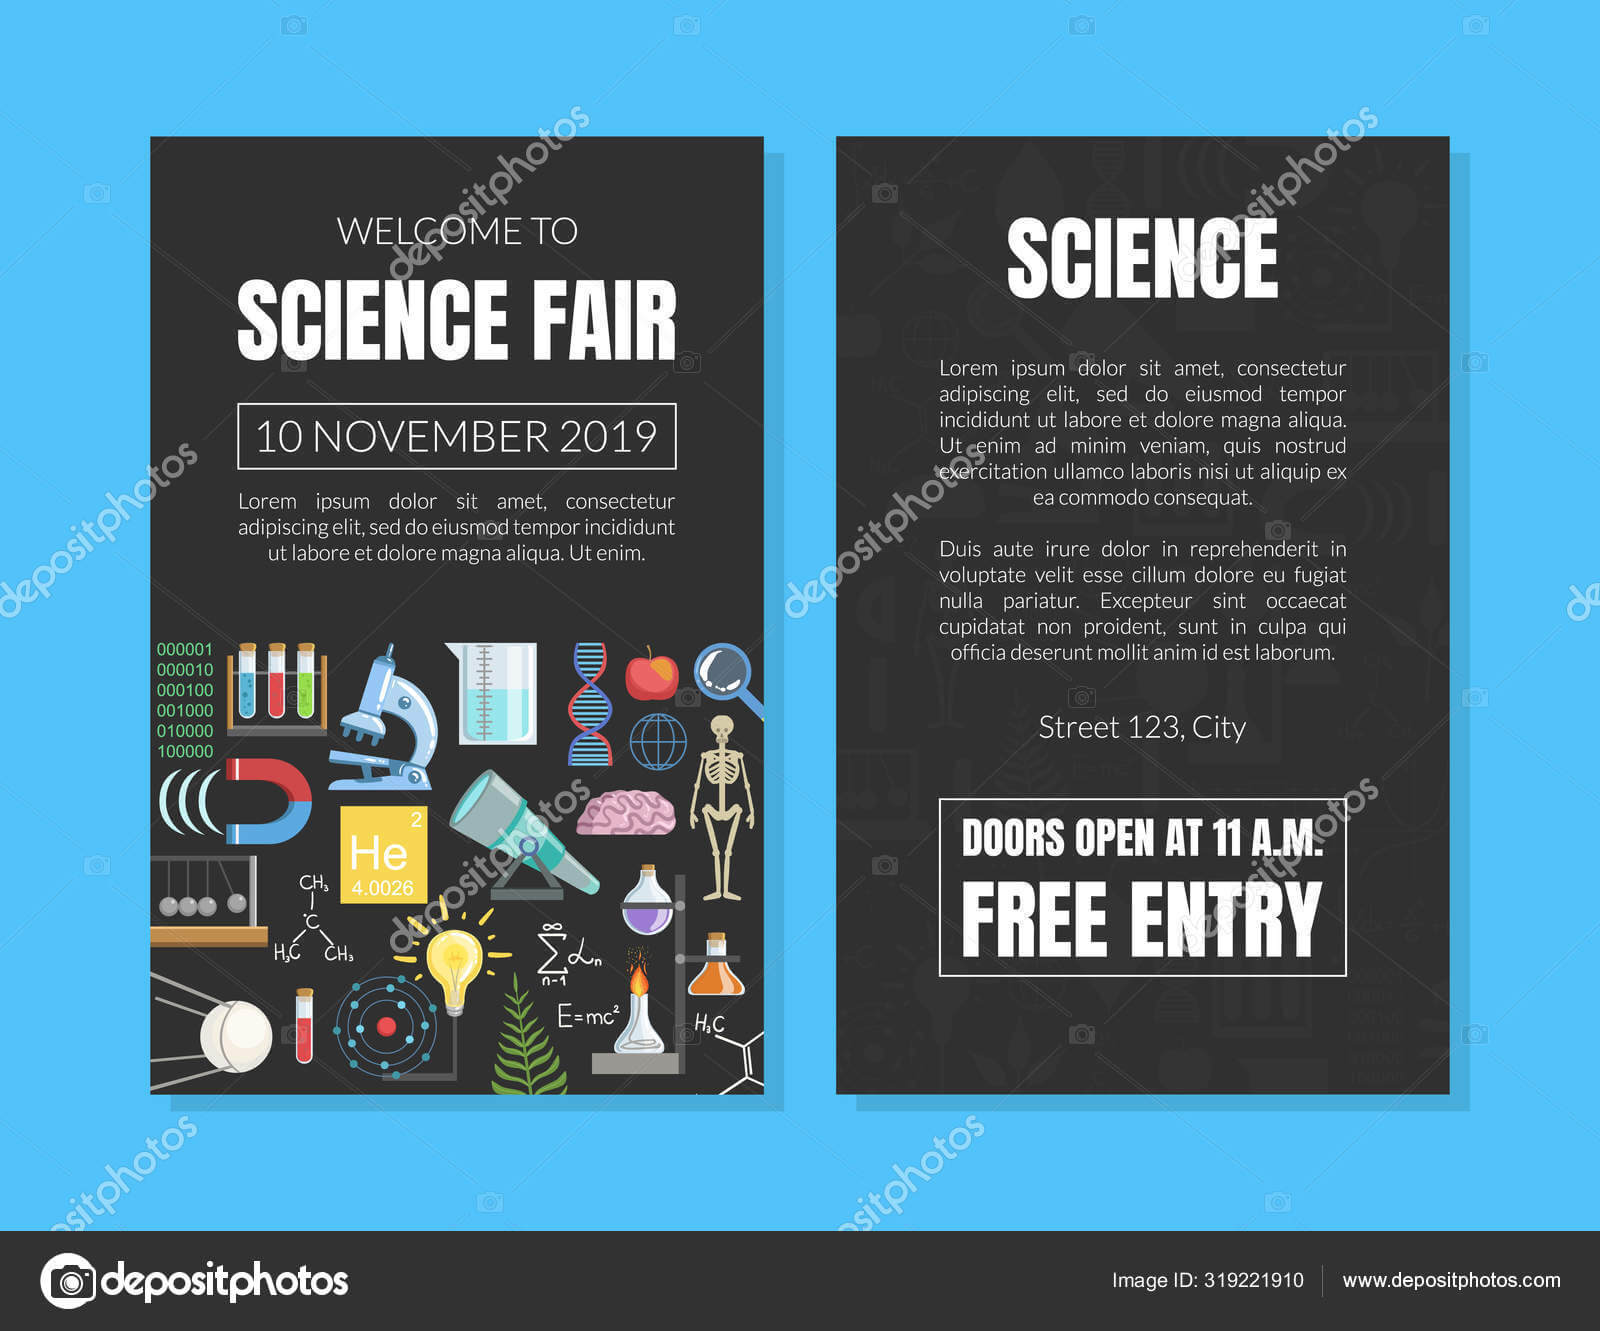 Welcome To Science Fair Invitation Card Template, Scientific With Regard To Science Fair Banner Template